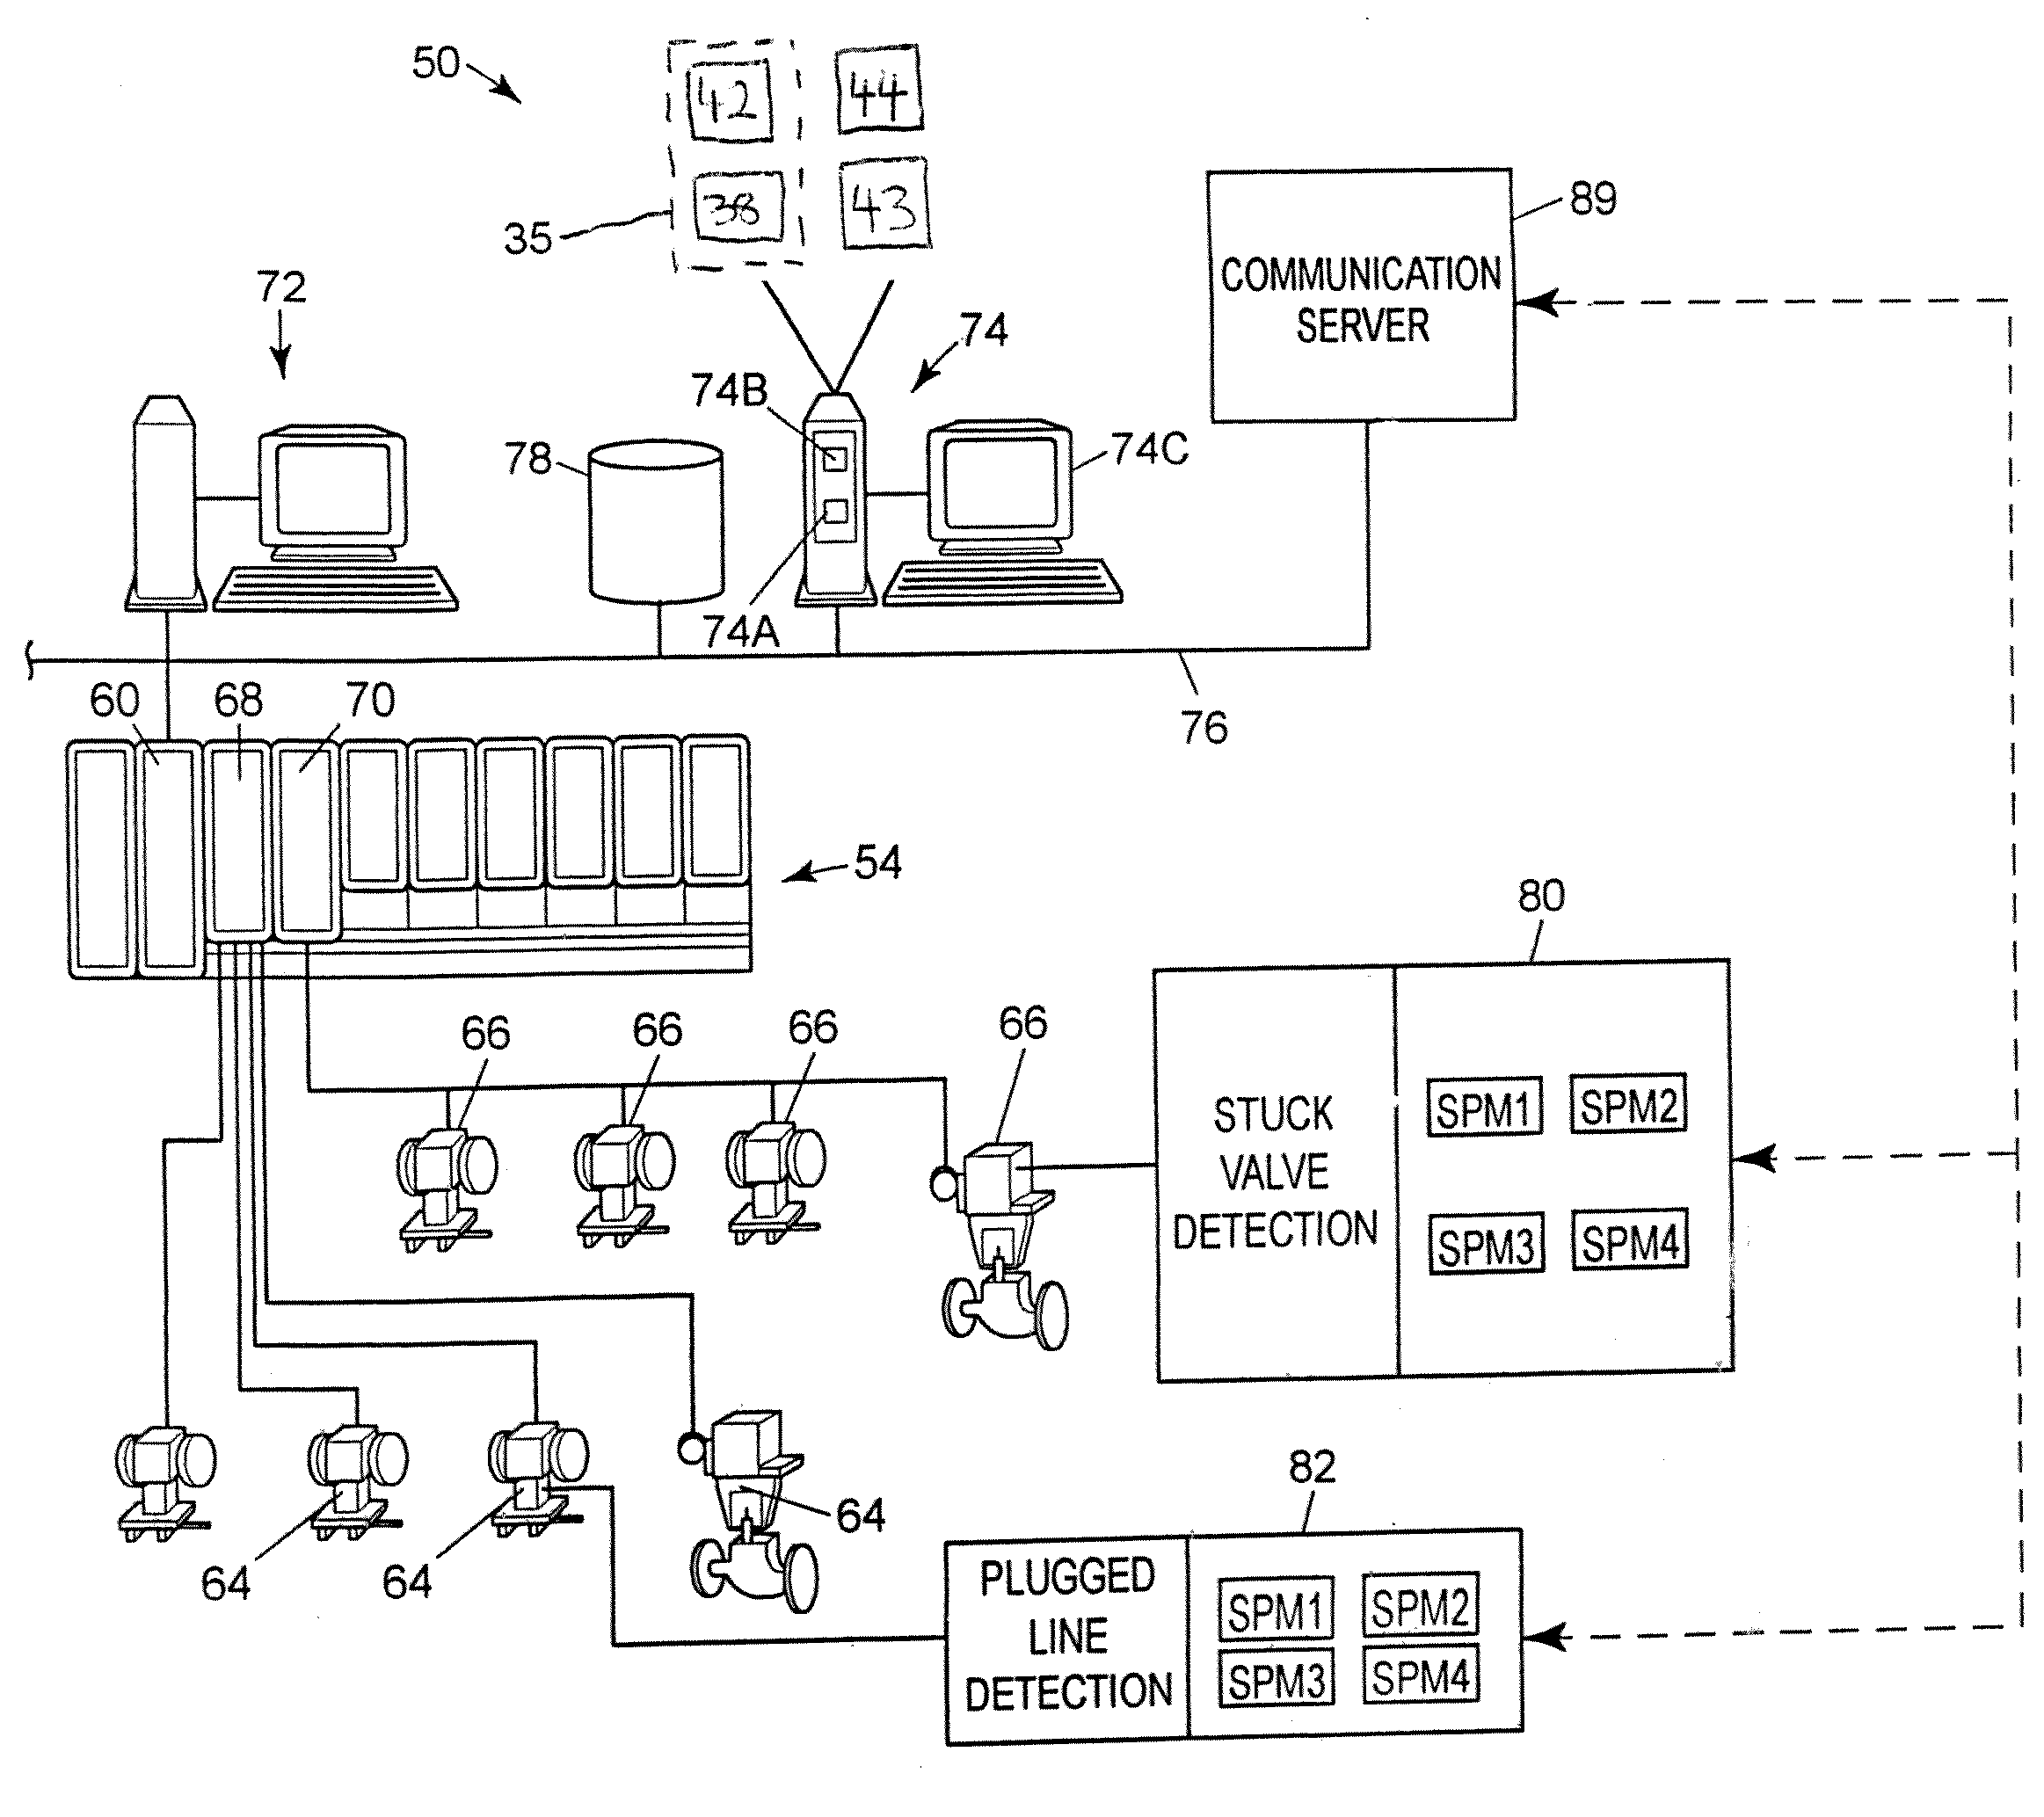 Method and System for Detecting Faults in a Process Plant